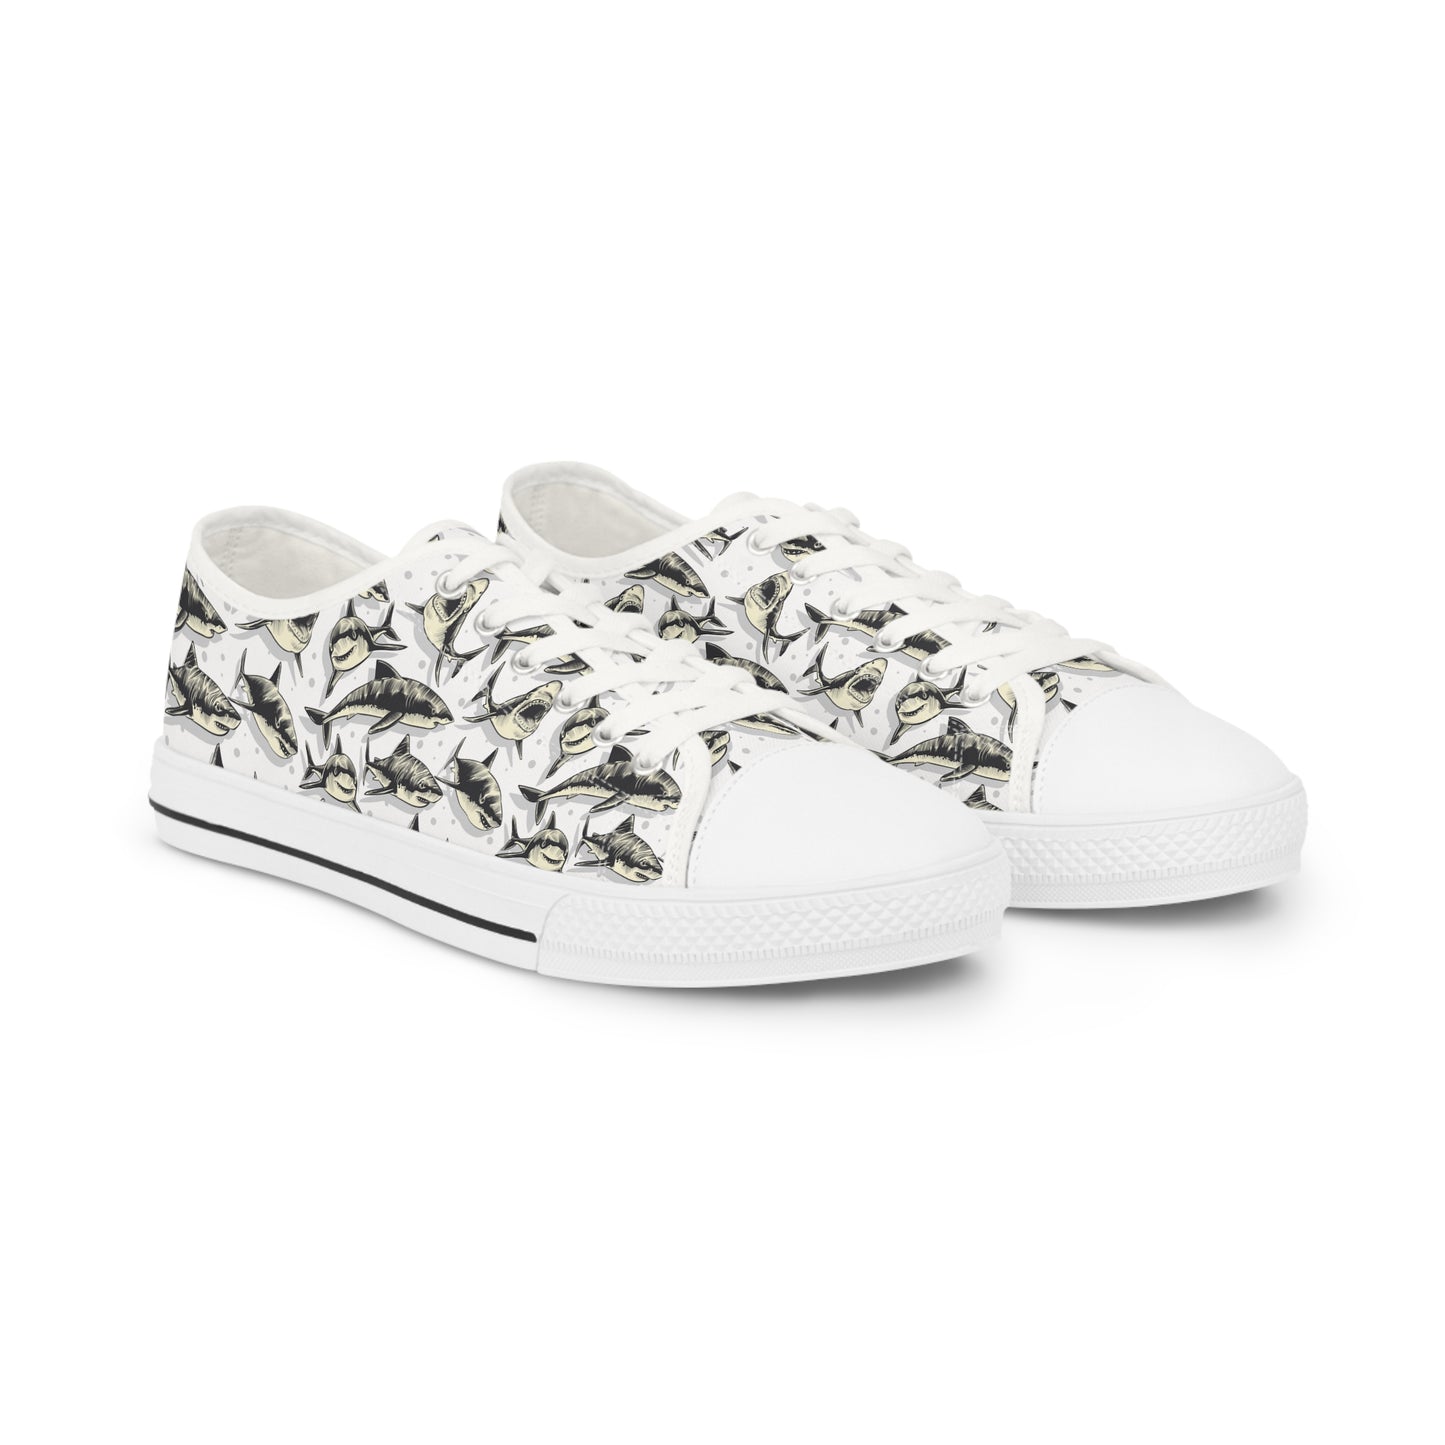 Amity Island Shark Icon | Low Top Sneakers